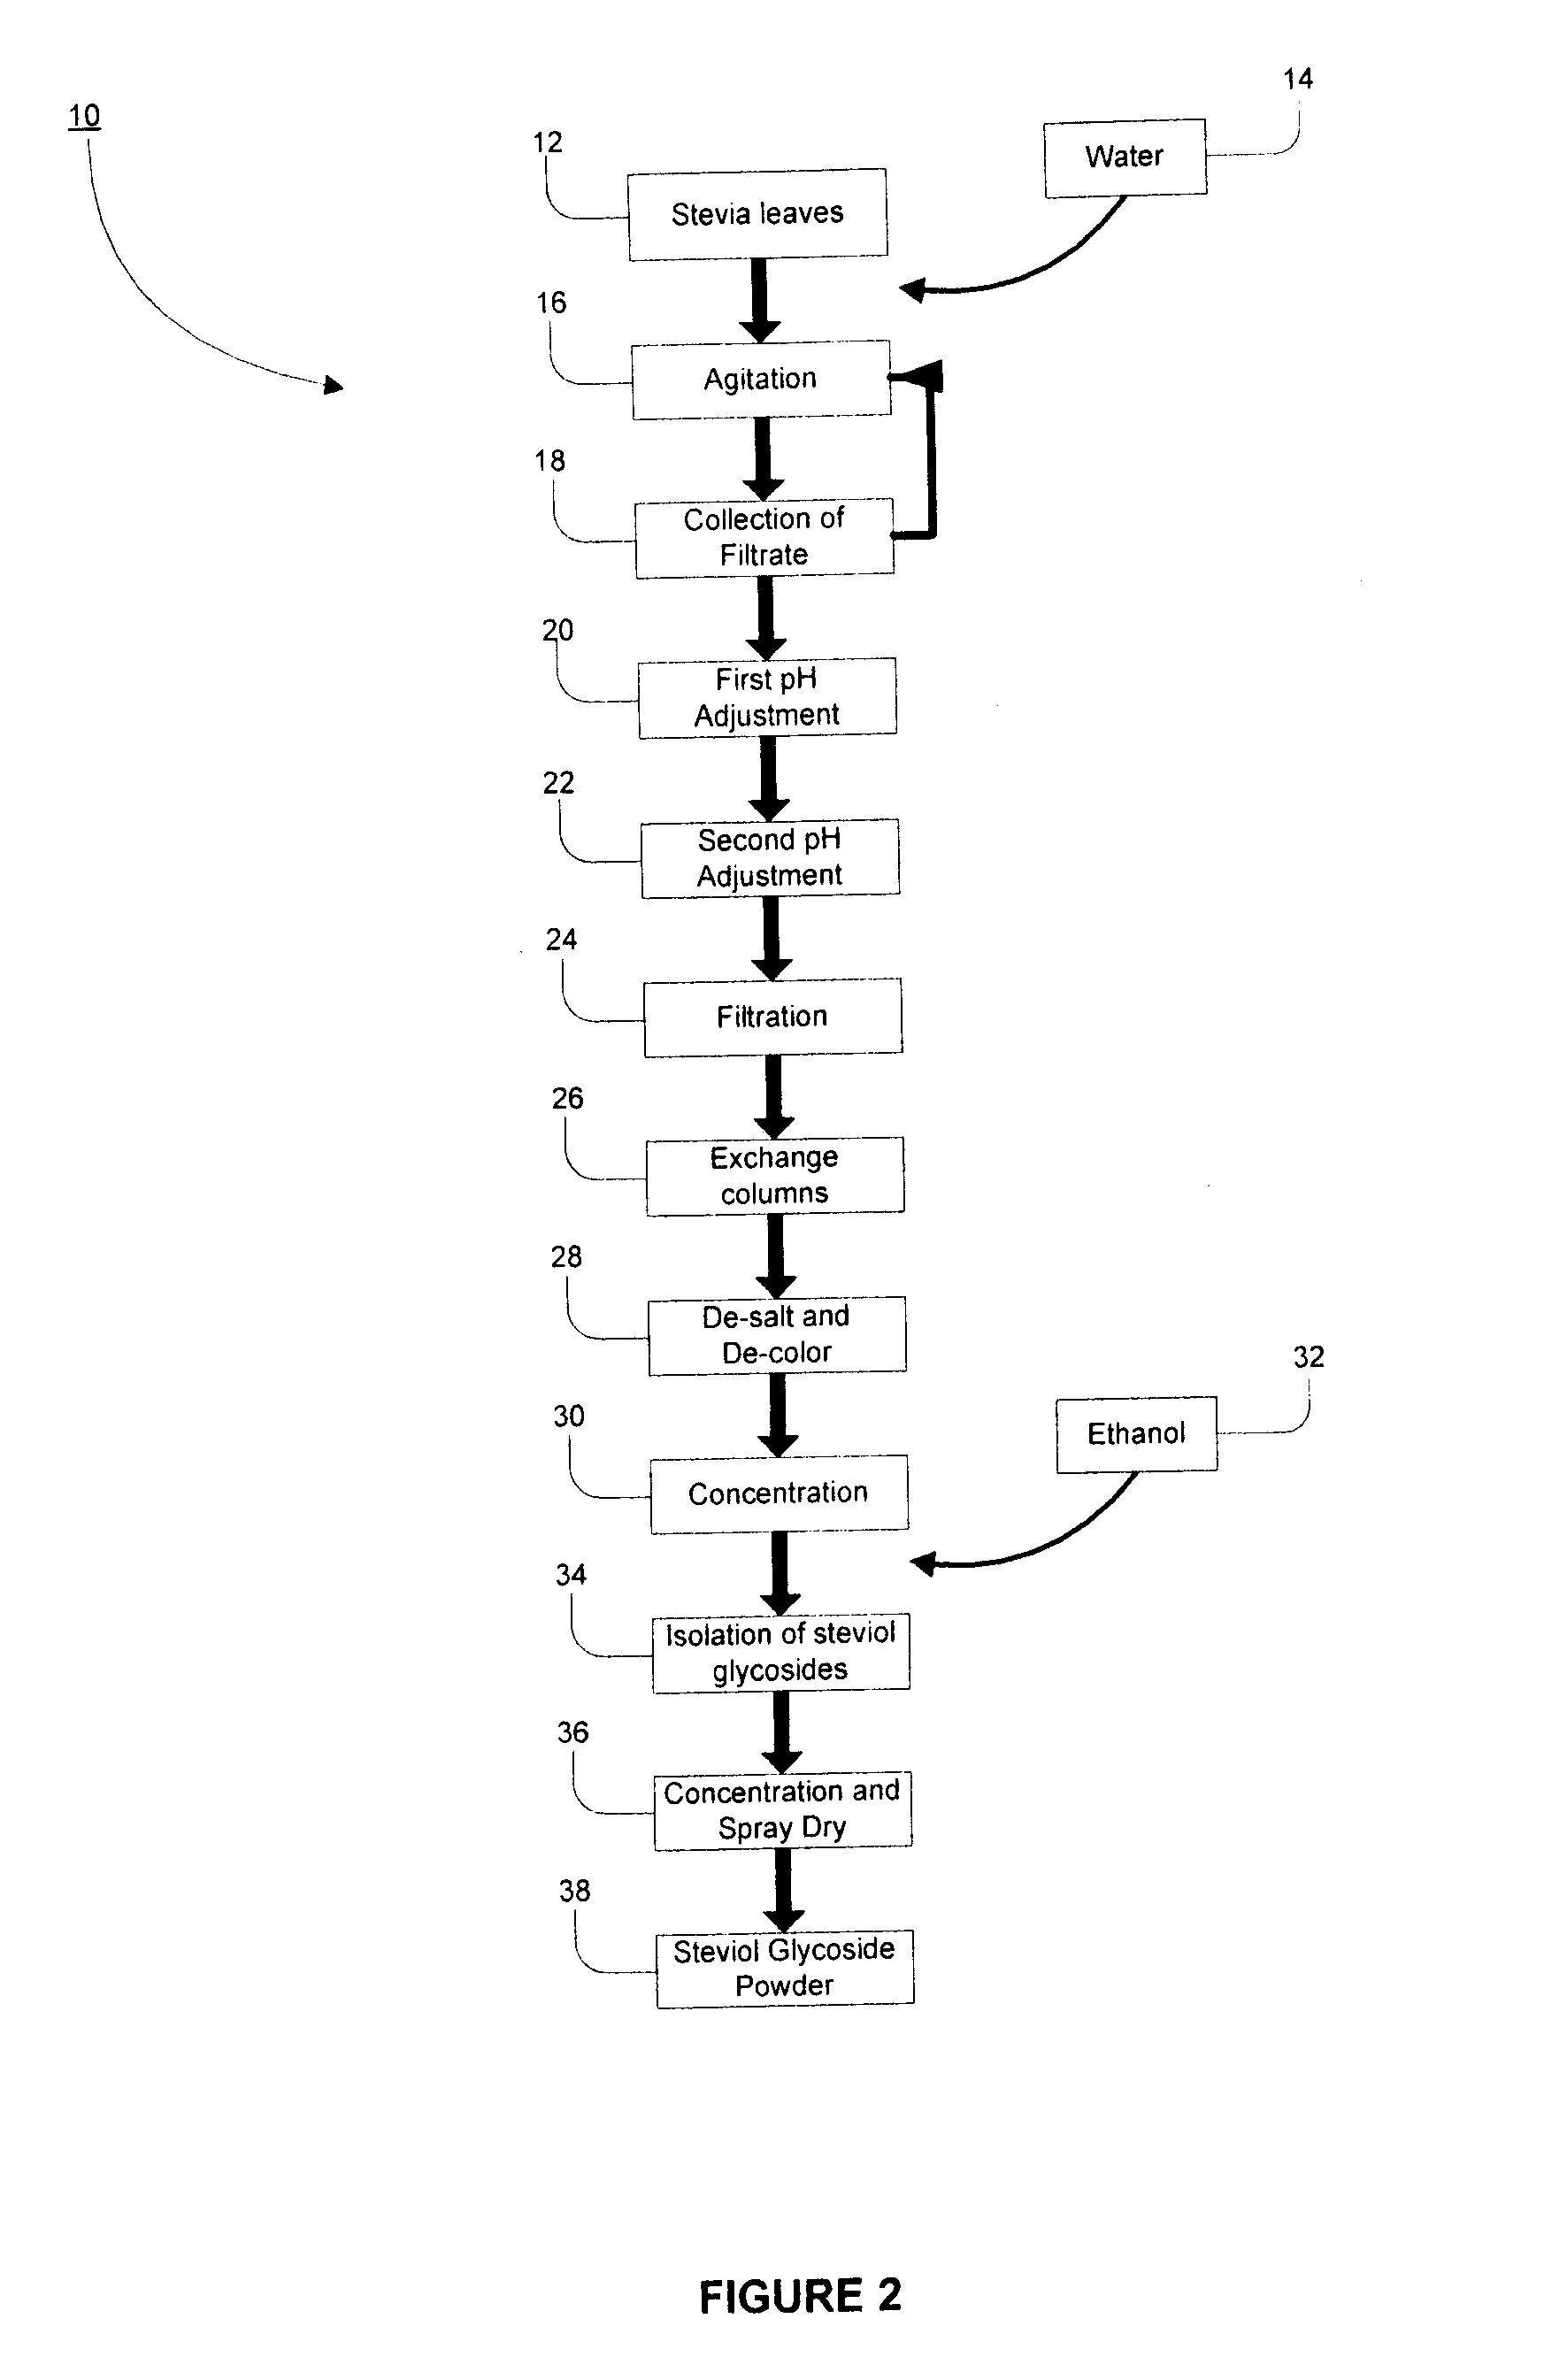 Sweetener Compositions and Methods of Making Same